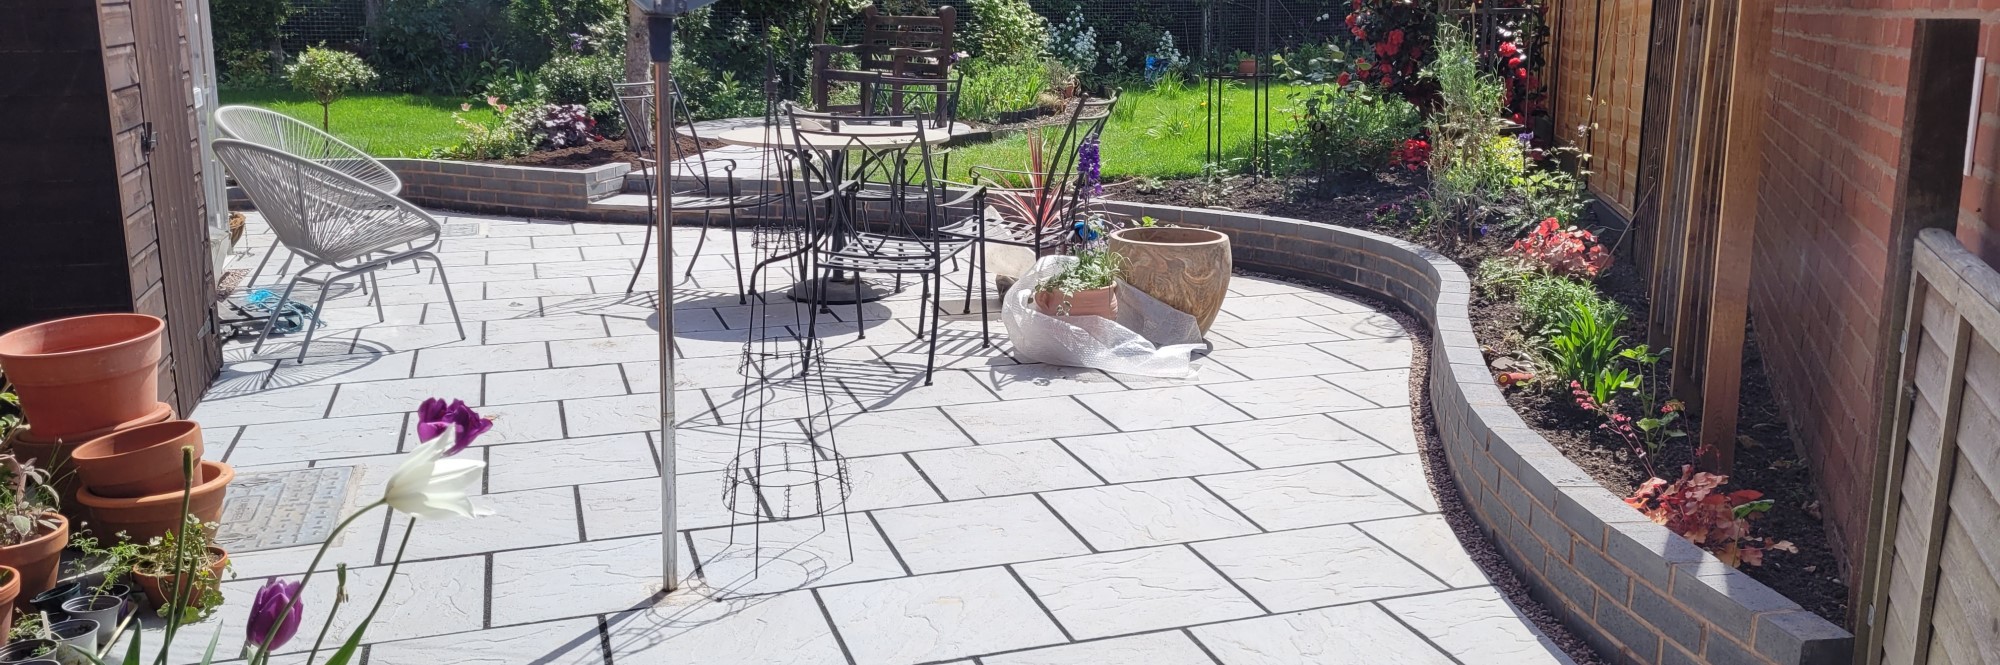 Patios paths DG Services Landscaping gardening Bromsgrove Droitwich